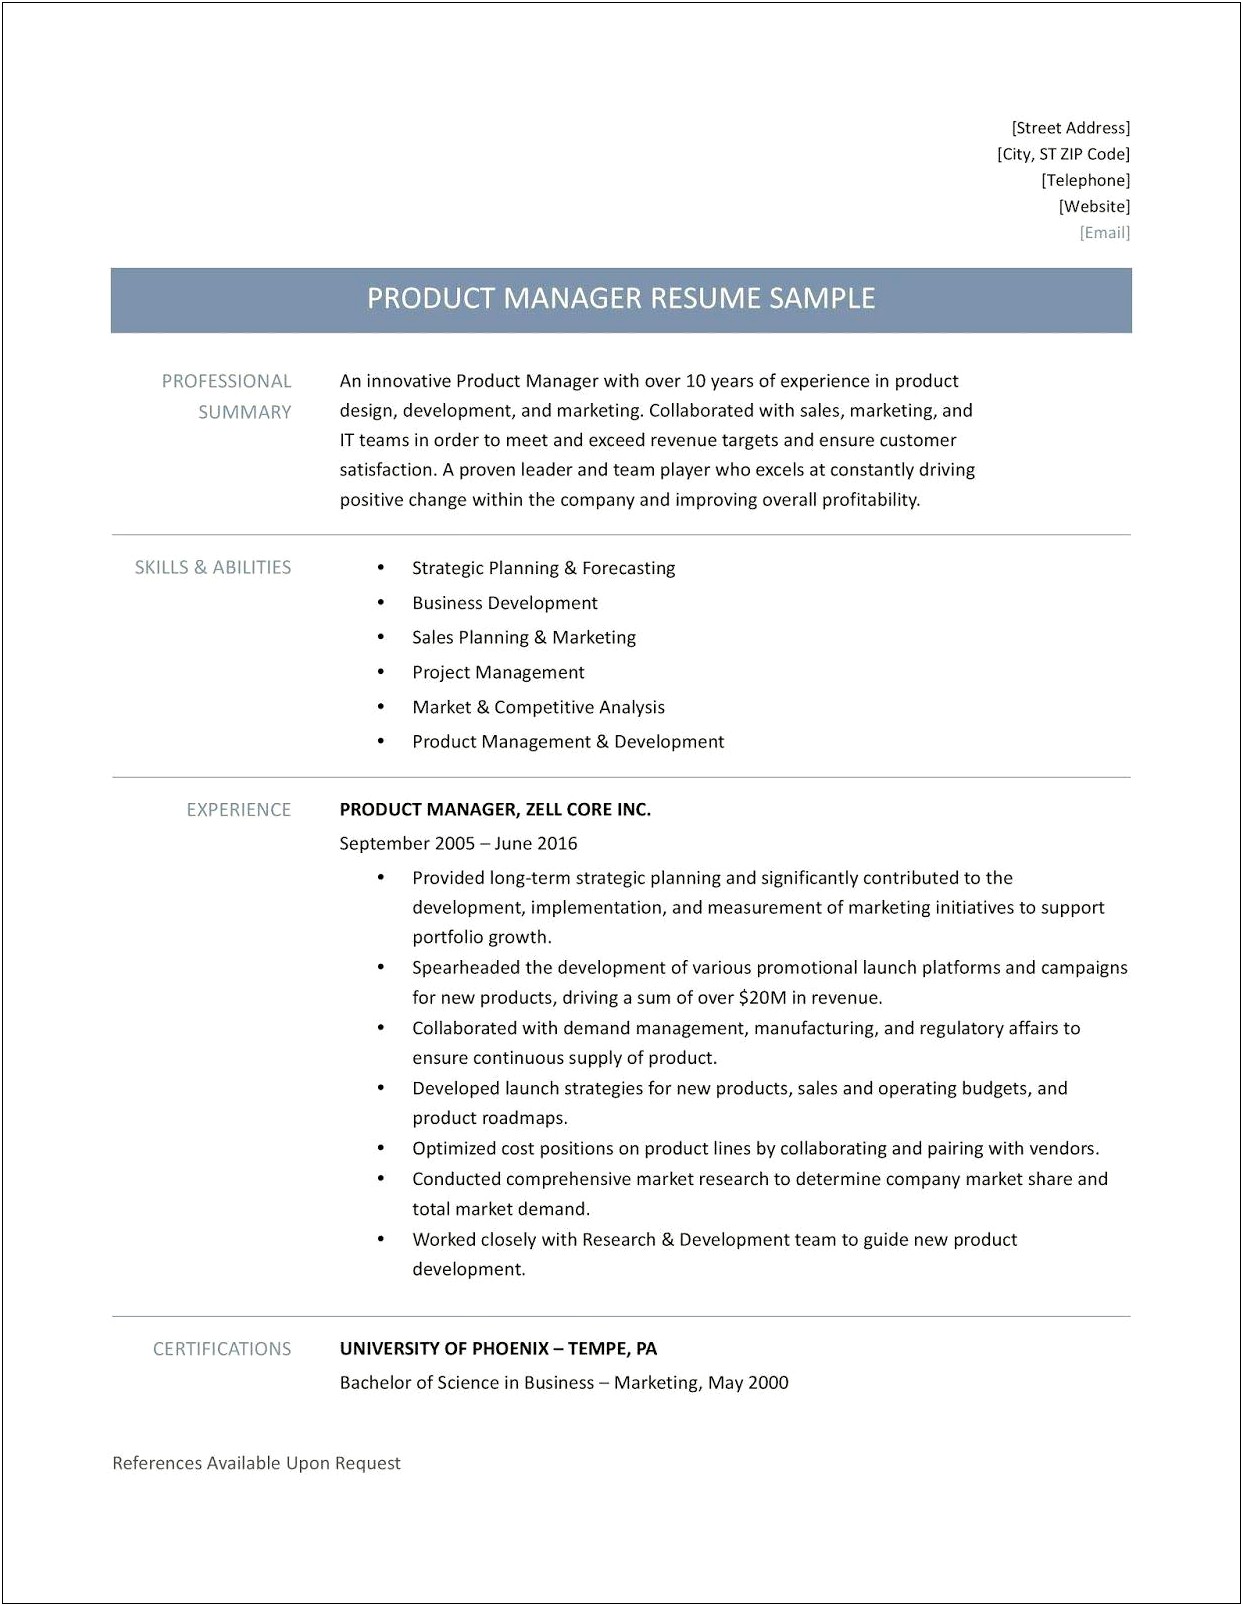 Google Associate Product Manager Resume